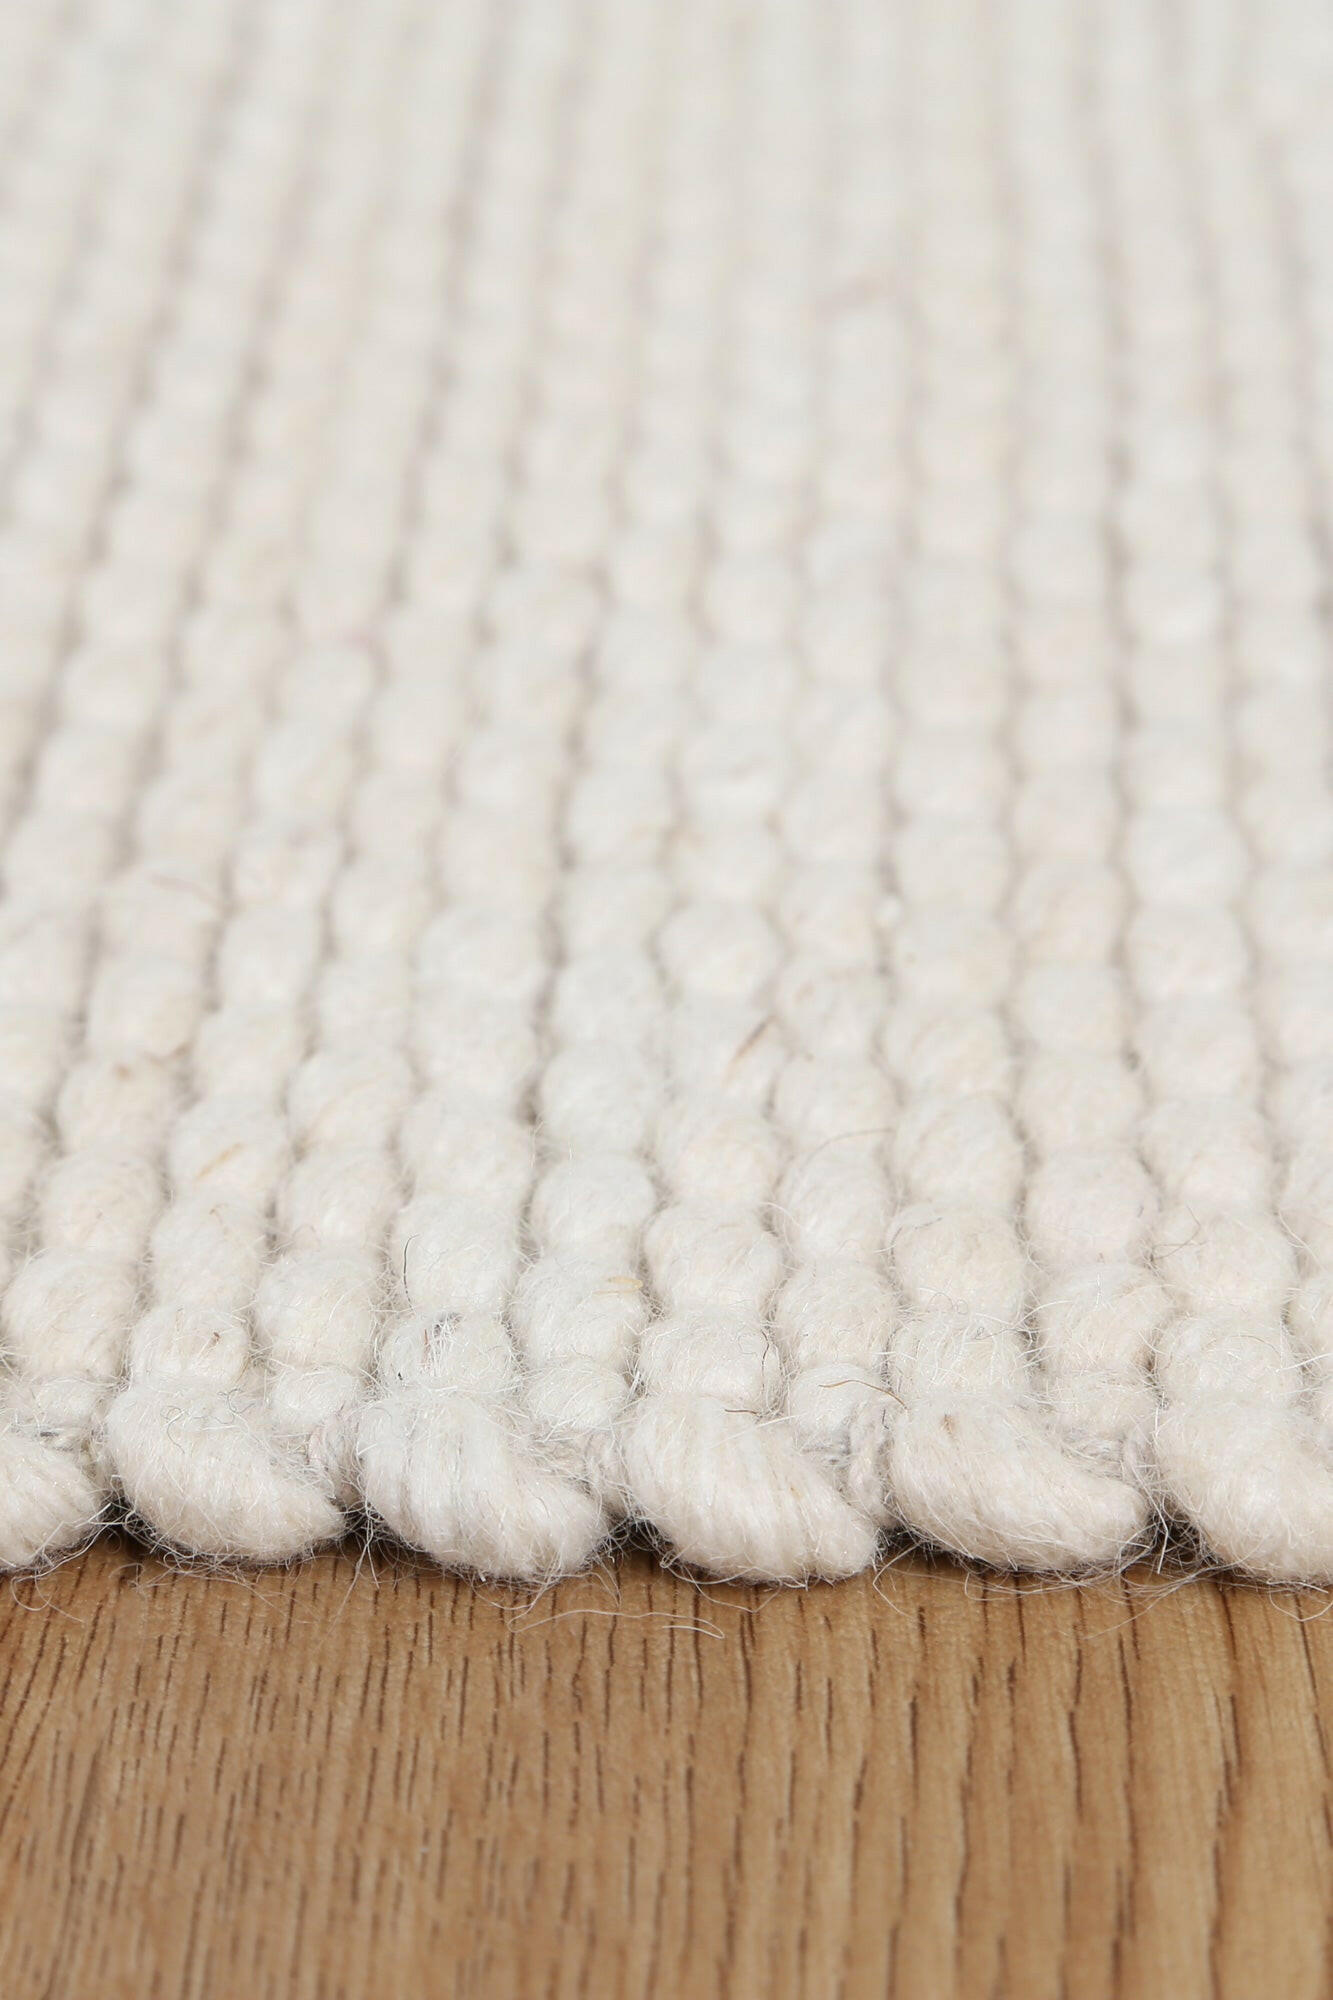 Arielle Contemporary Ivory Wool Rug